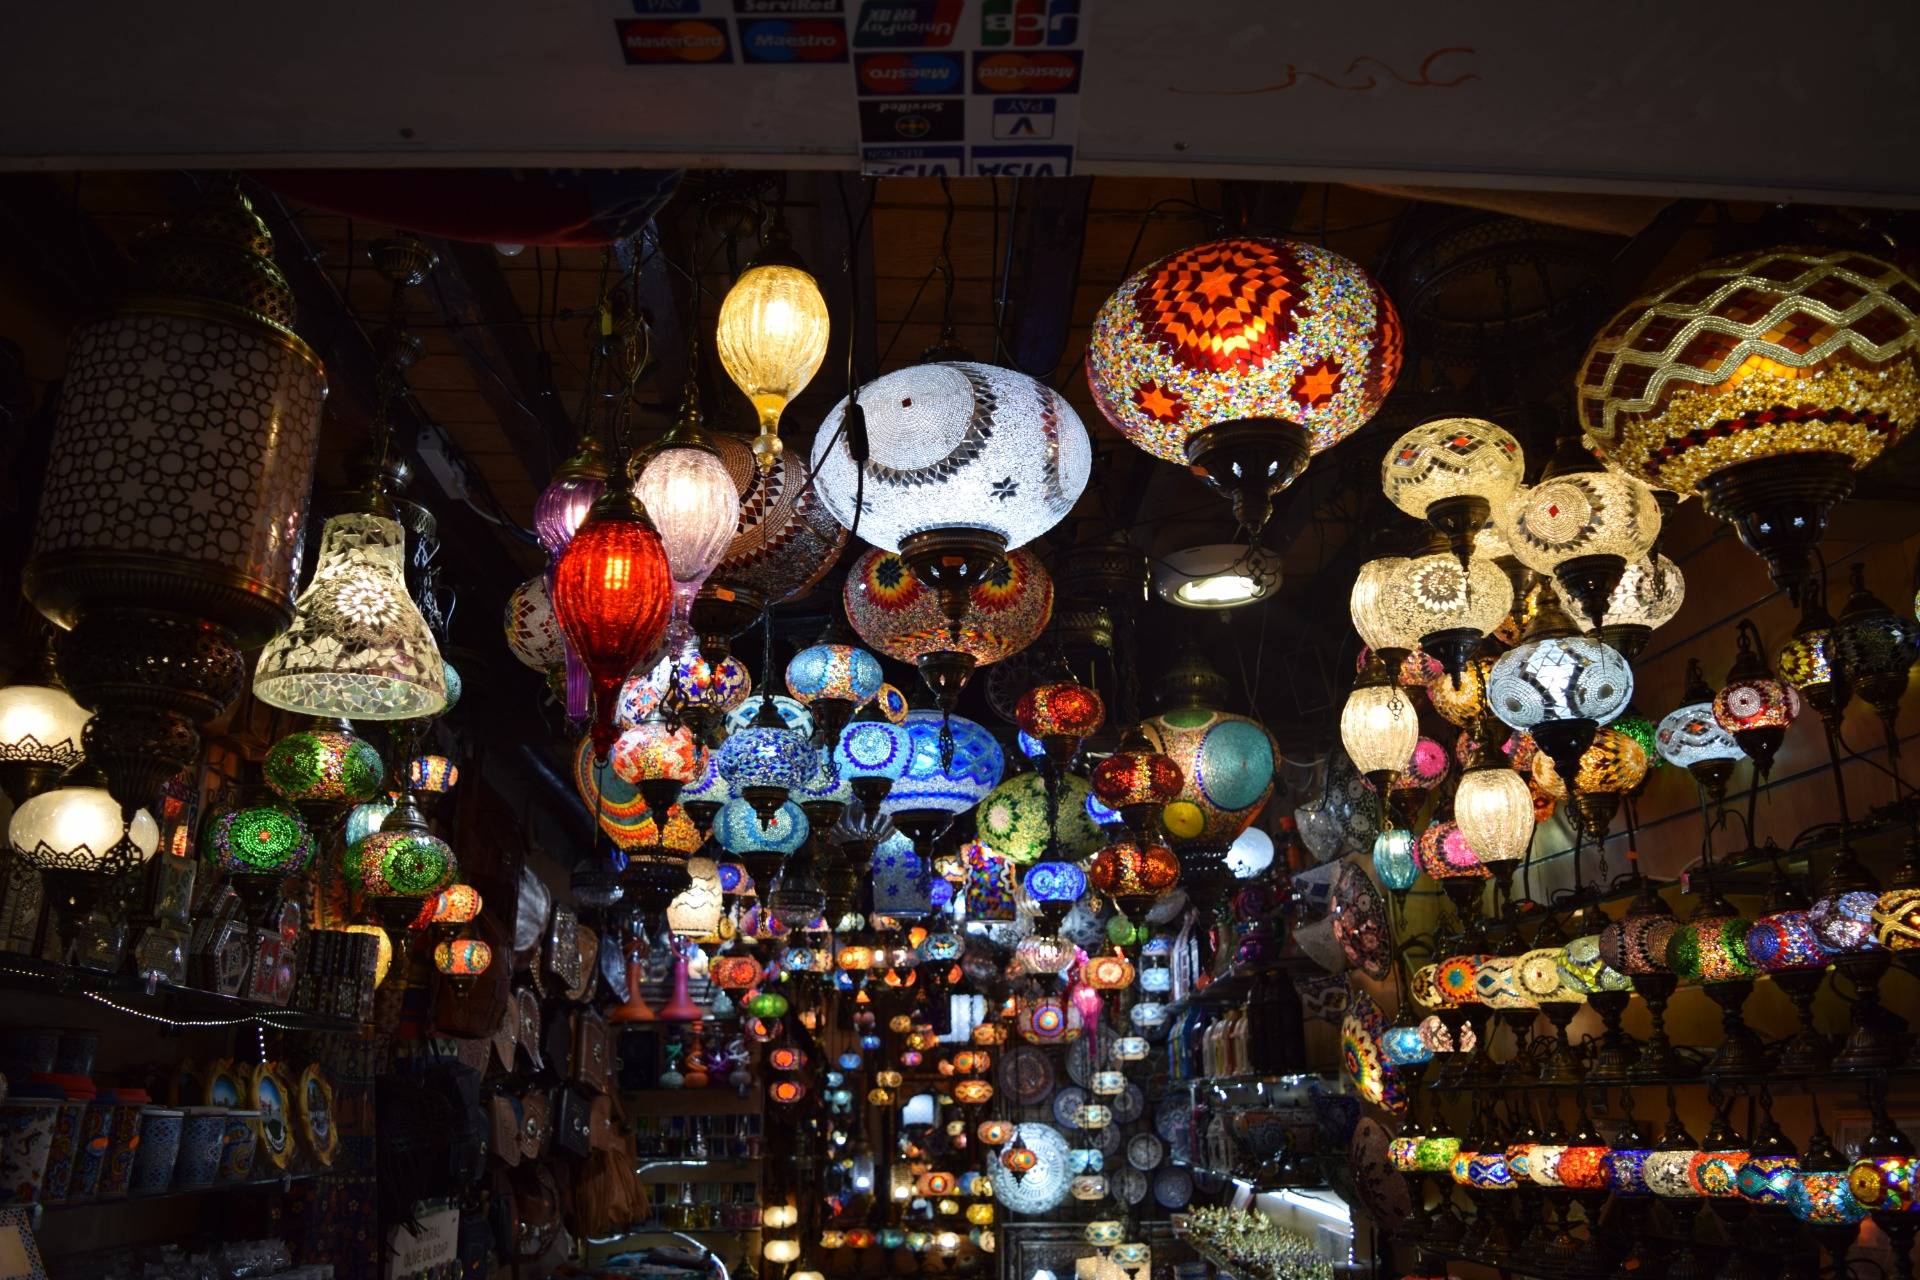 Doing some shopping at the Medina in Granada, Spain